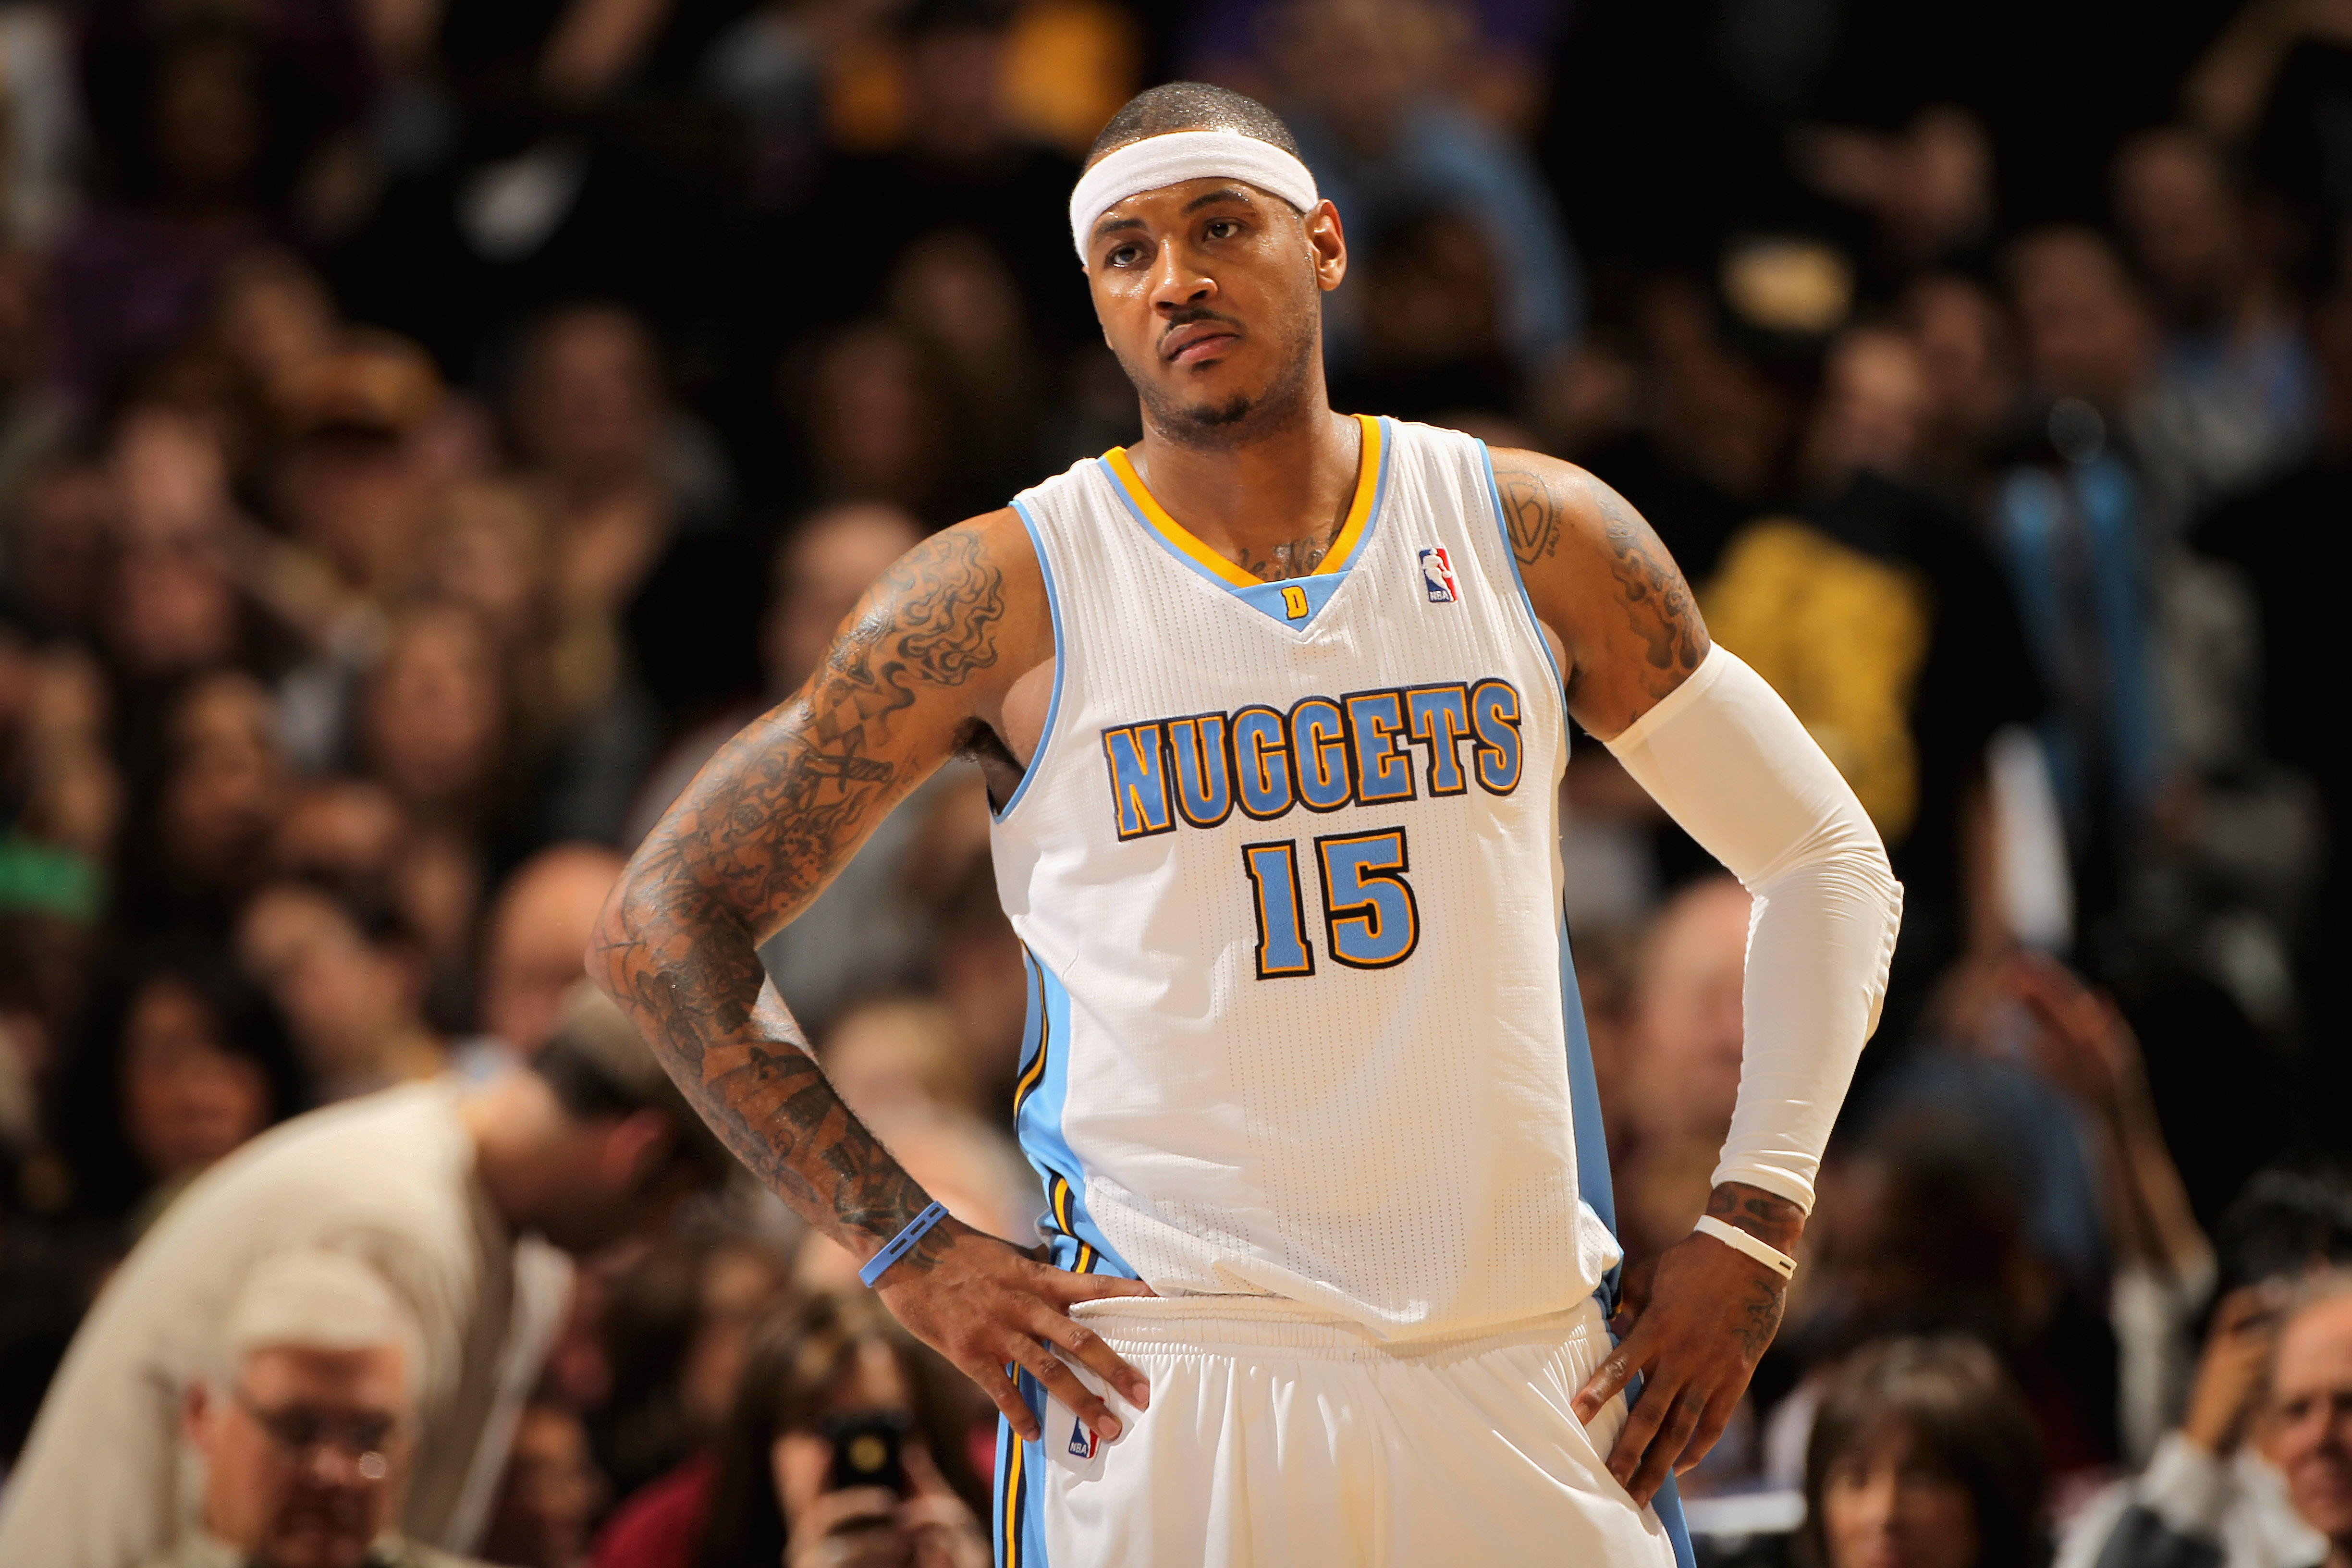 NBA Offseason 2020: 5 potential landing spots for Carmelo Anthony